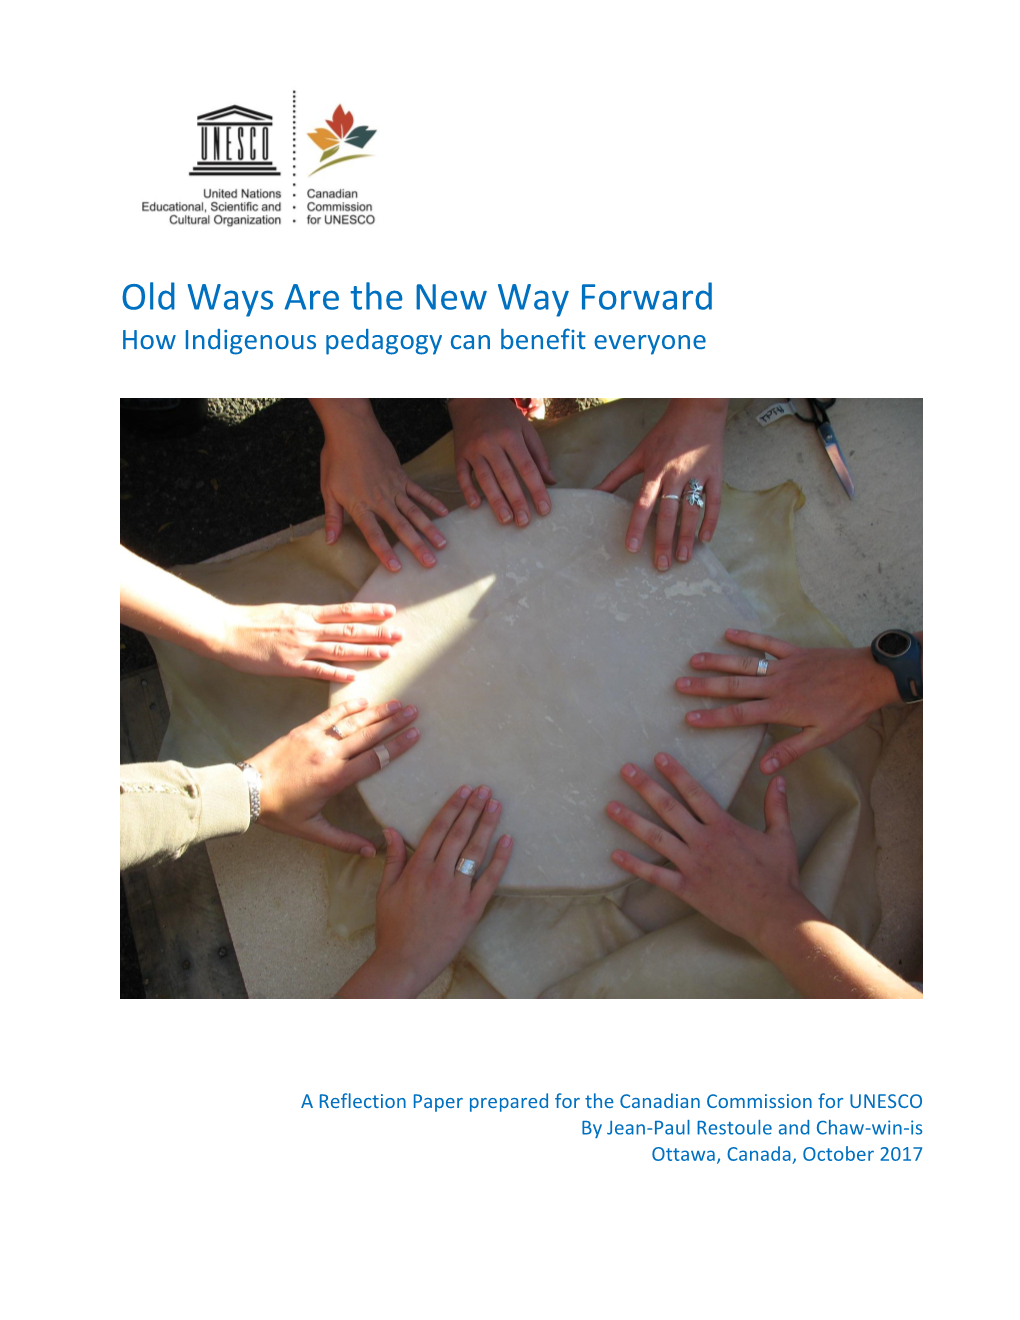 Old Ways Are the New Way Forward: How Indigenous Pedagogy Can Benefit Everyone’’, the Canadian Commission for UNESCO’S Idealab, October 2017